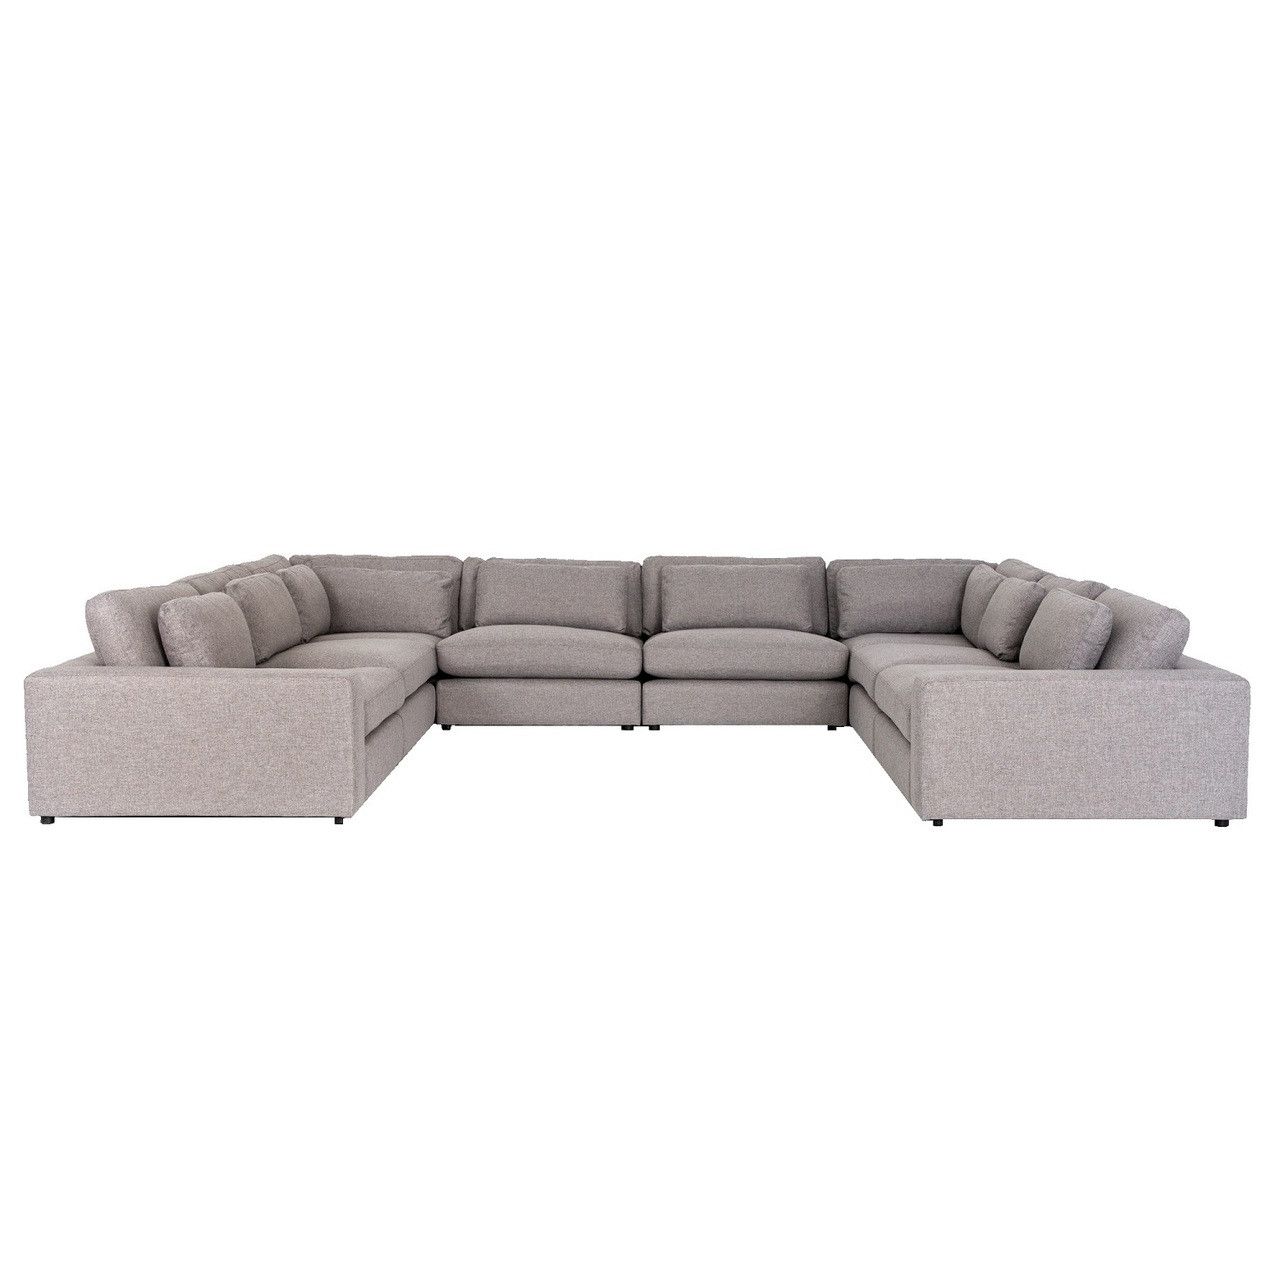 Bloor Contemporary Gray Fabric 8 Piece U Shaped Sectional Sofa 170" Regarding Modern U Shape Sectional Sofas In Gray (Gallery 13 of 20)